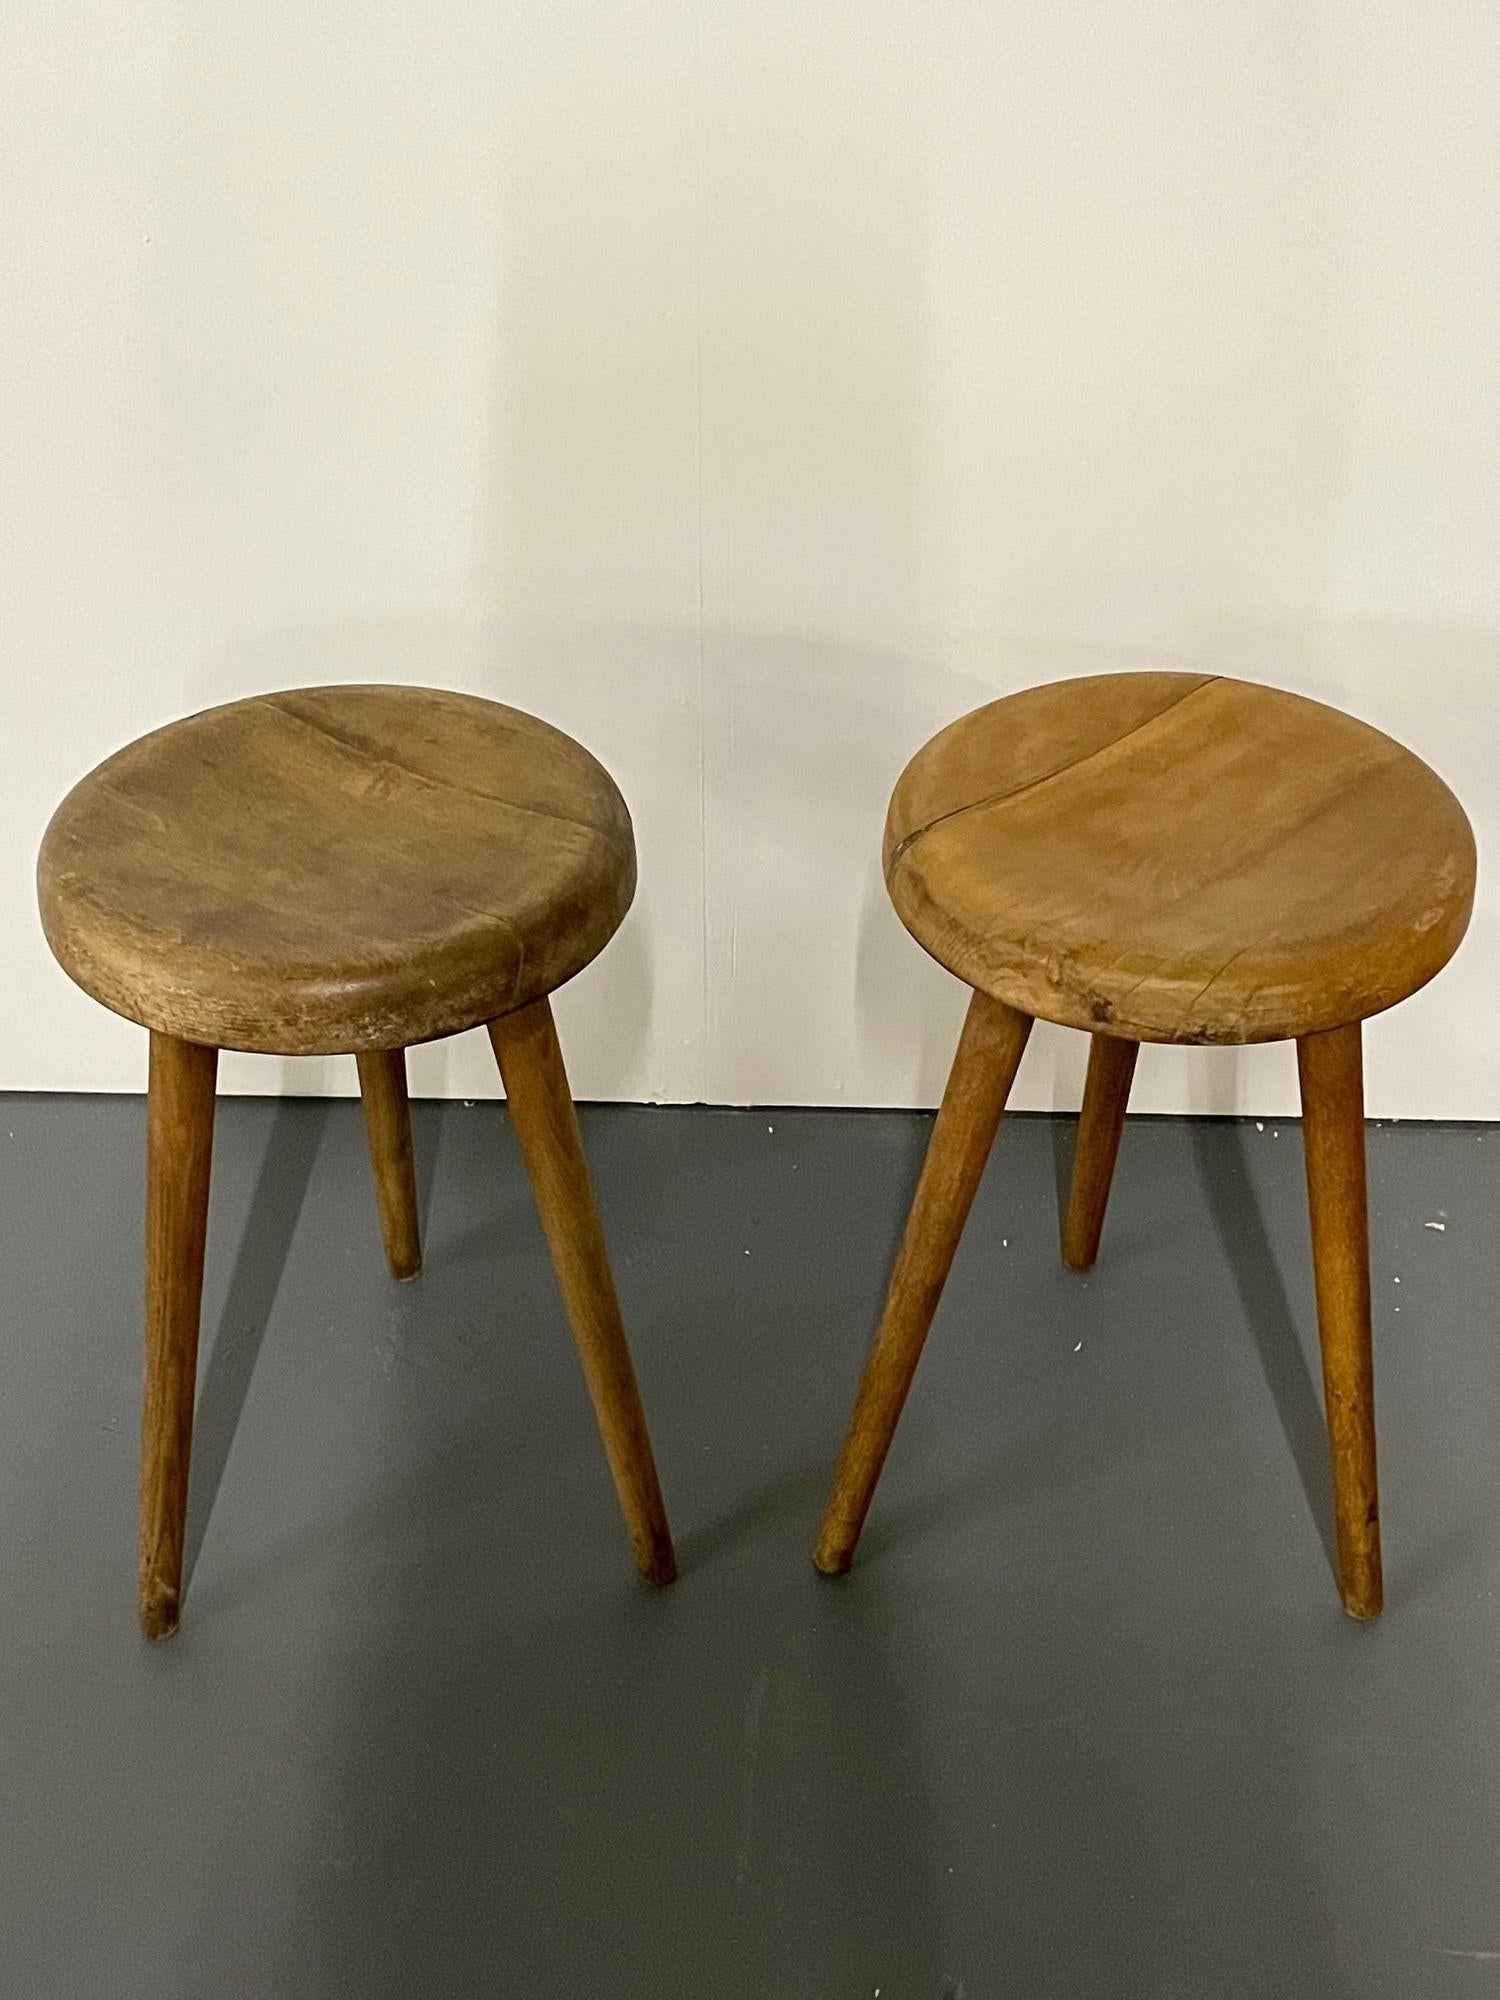 20th Century Mid-Century Modern Wooden French Provincial Stools, Charlotte Perriand Style For Sale